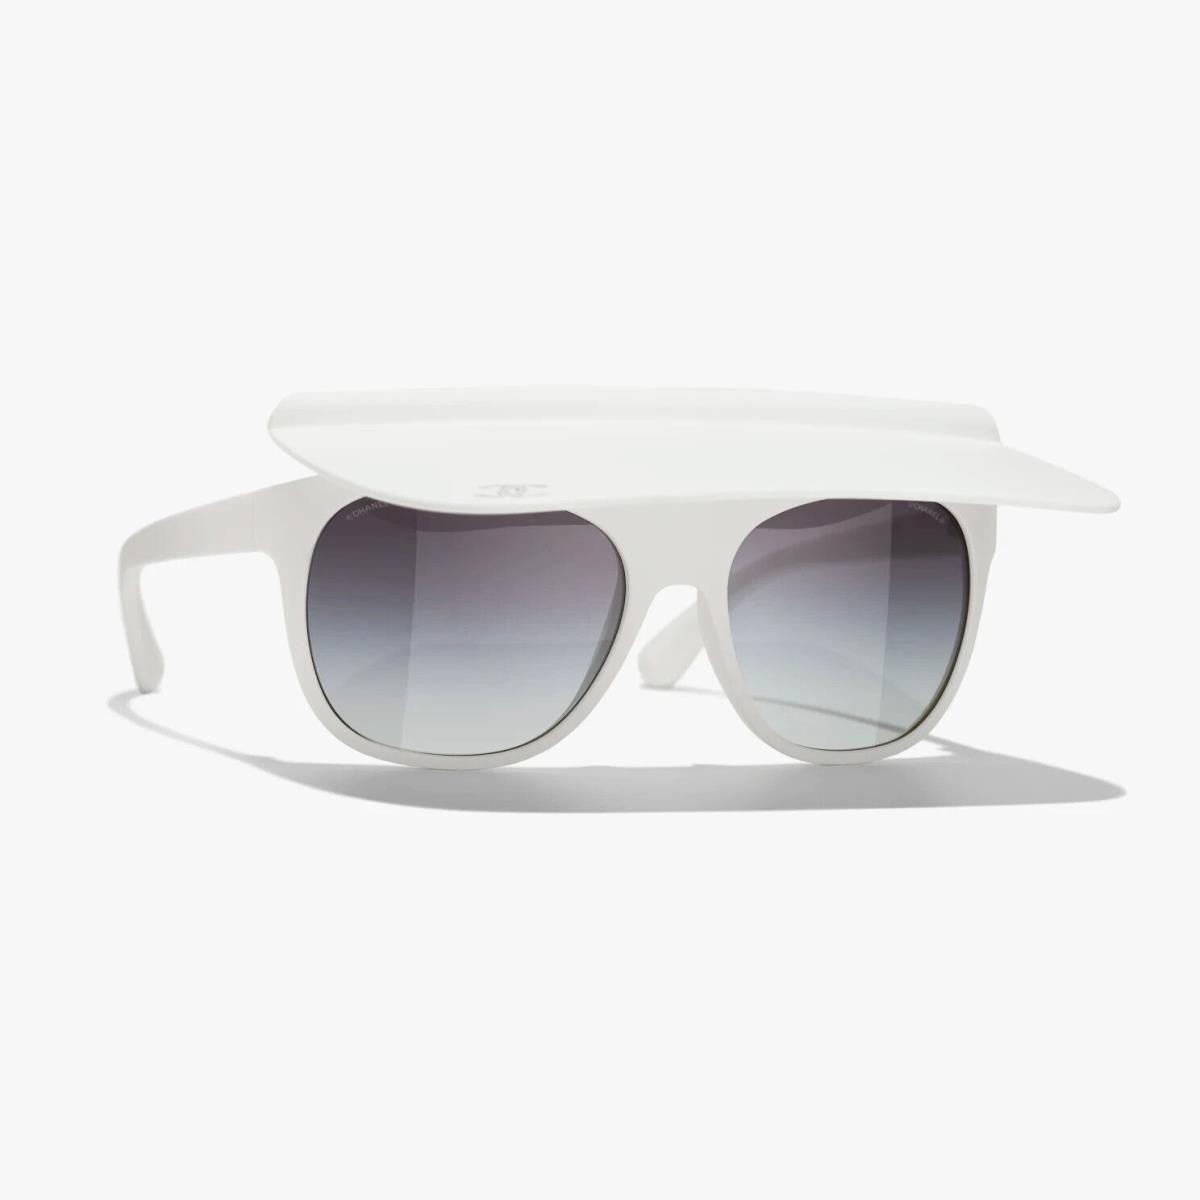 Chanel 2021 Cruise Collection A71046 White Limited Edition Visor Sunglasses